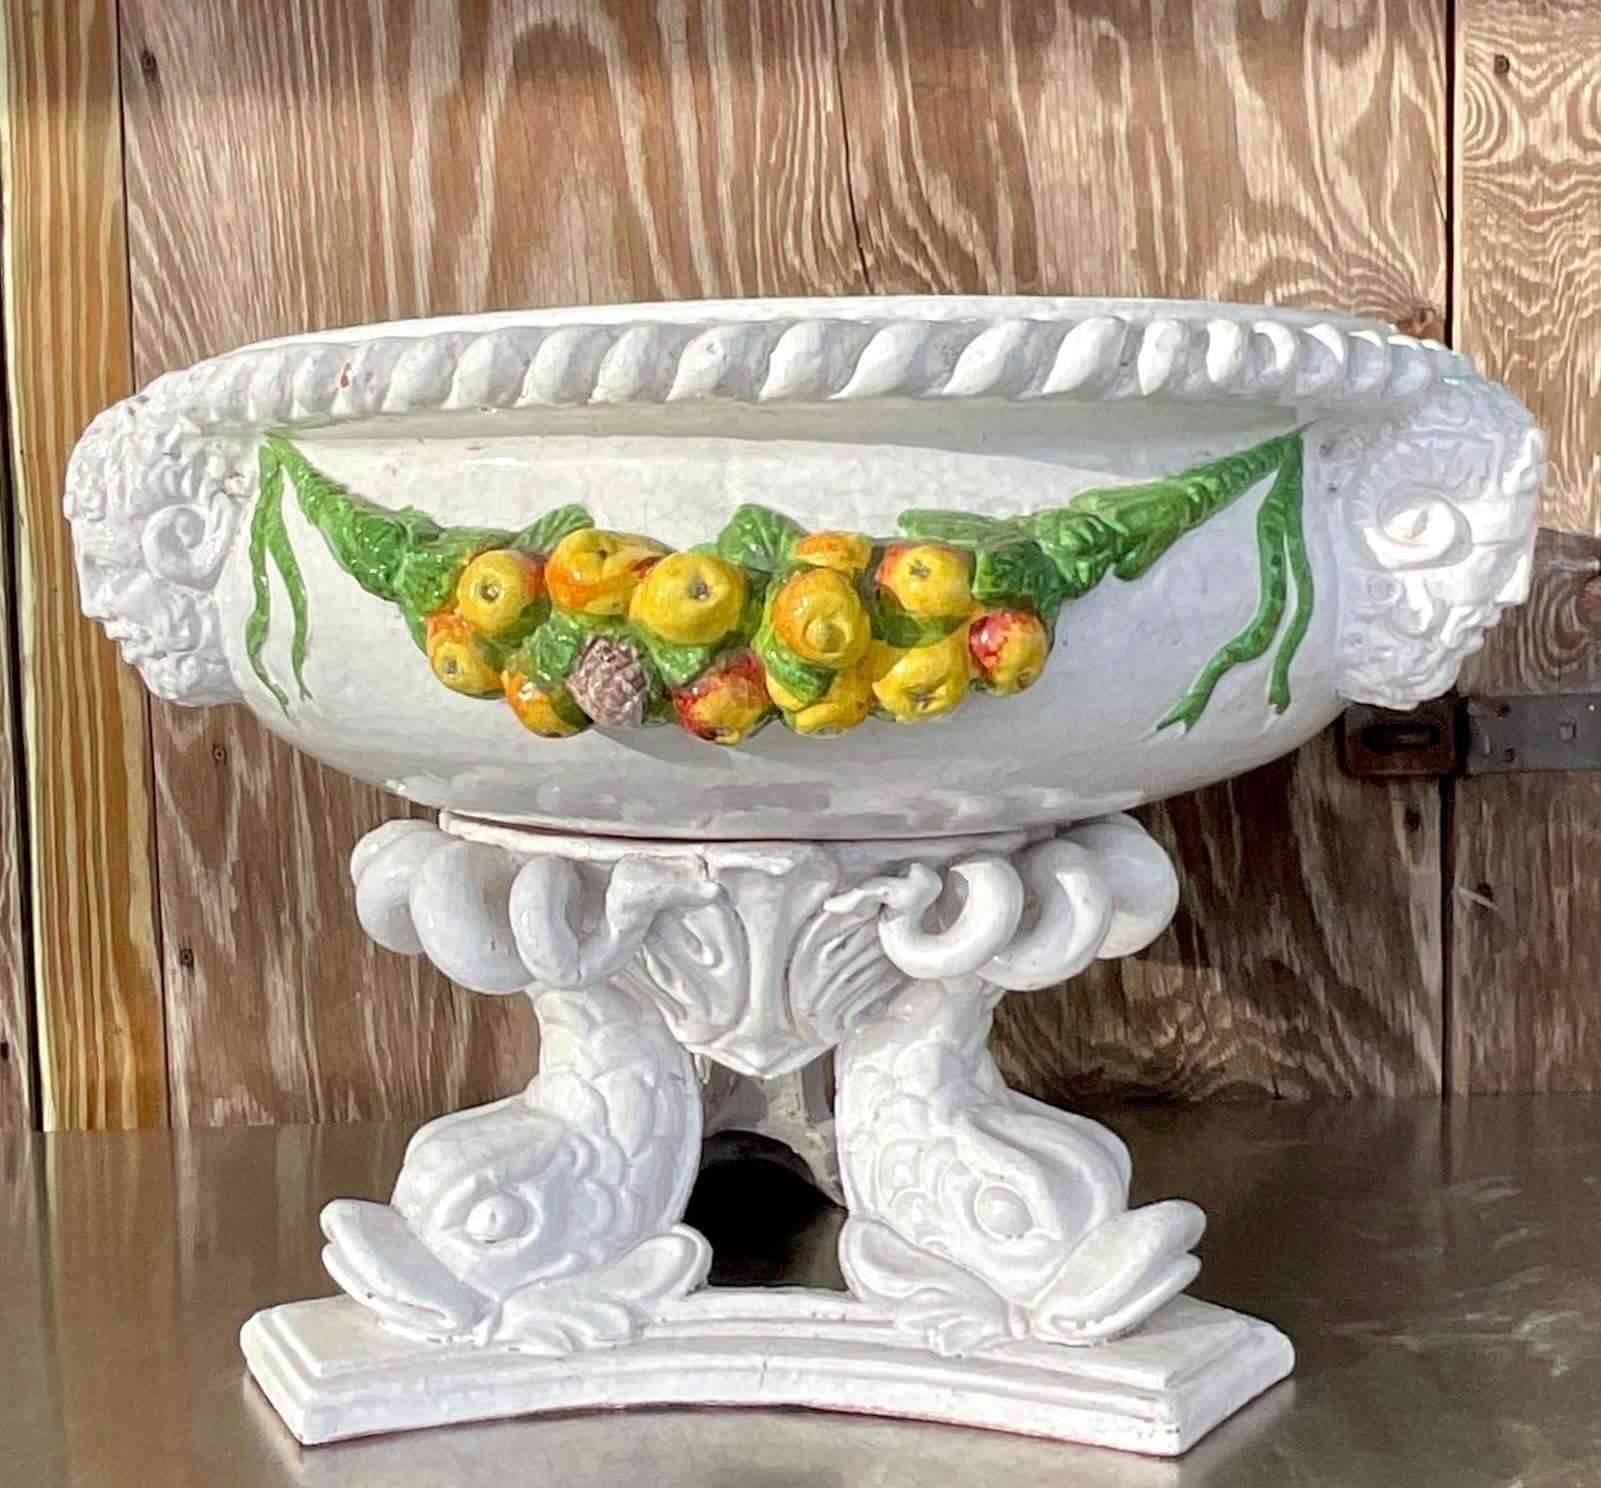 A fabulous vintage Coastal wide urn. A chic terracotta body in a glazed ceramic finish. Hand painted garland detail along with koi fish and warrior heads. Perfect indoors or outside. Acquired from a Palm Beach estate.